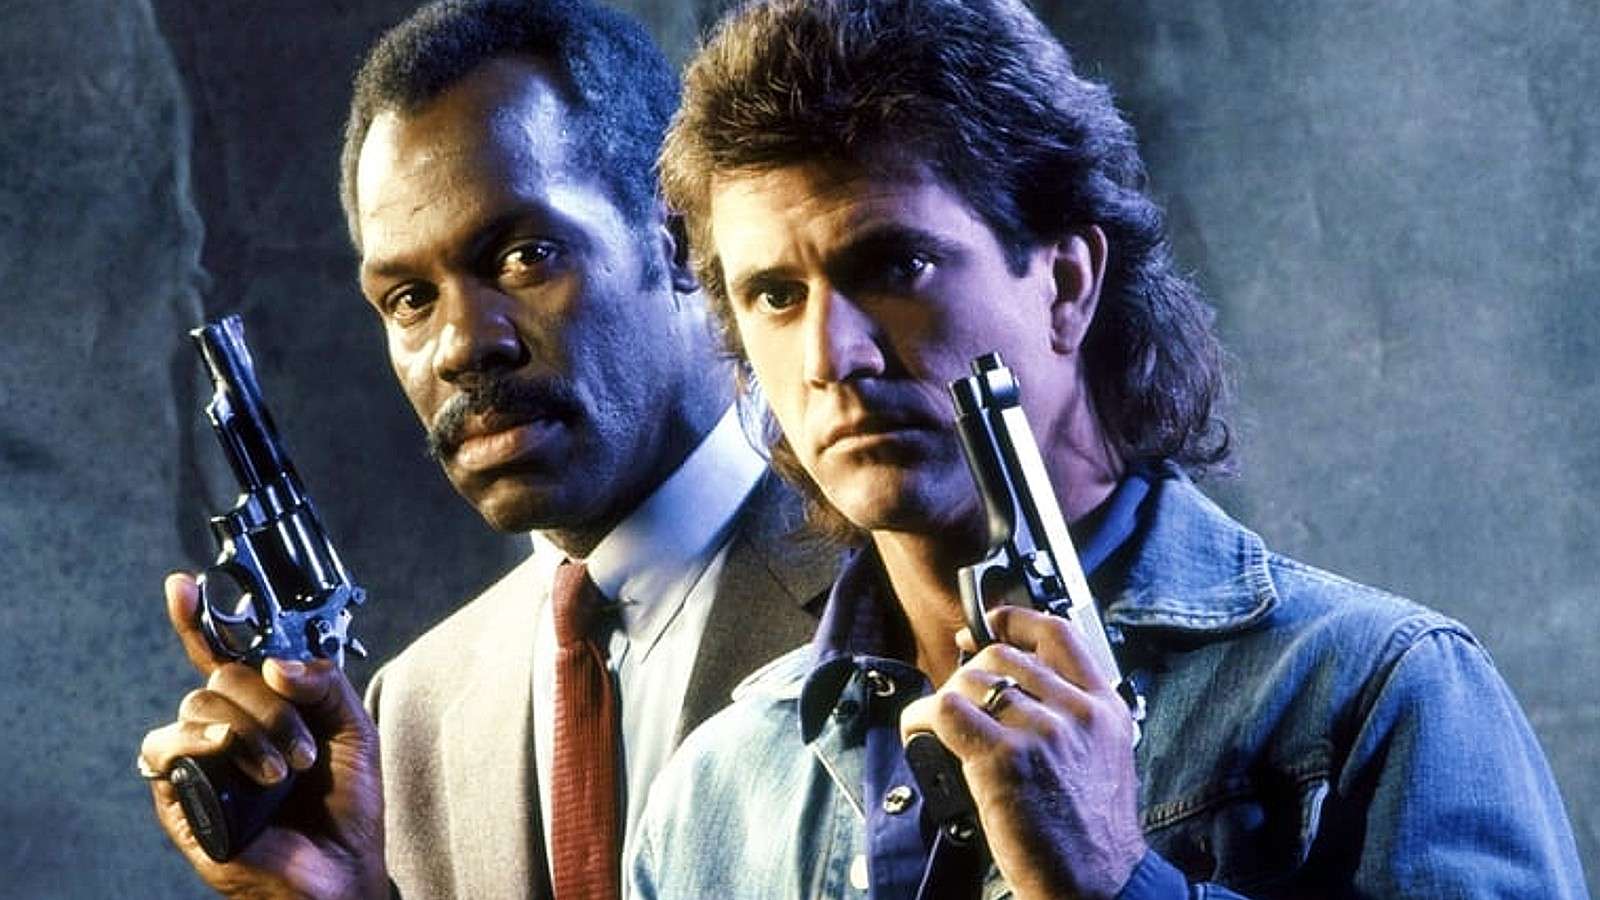 Mel Gibson and Danny Glover as Murtaugh and Riggs, who are returning for Lethal Weapon 5